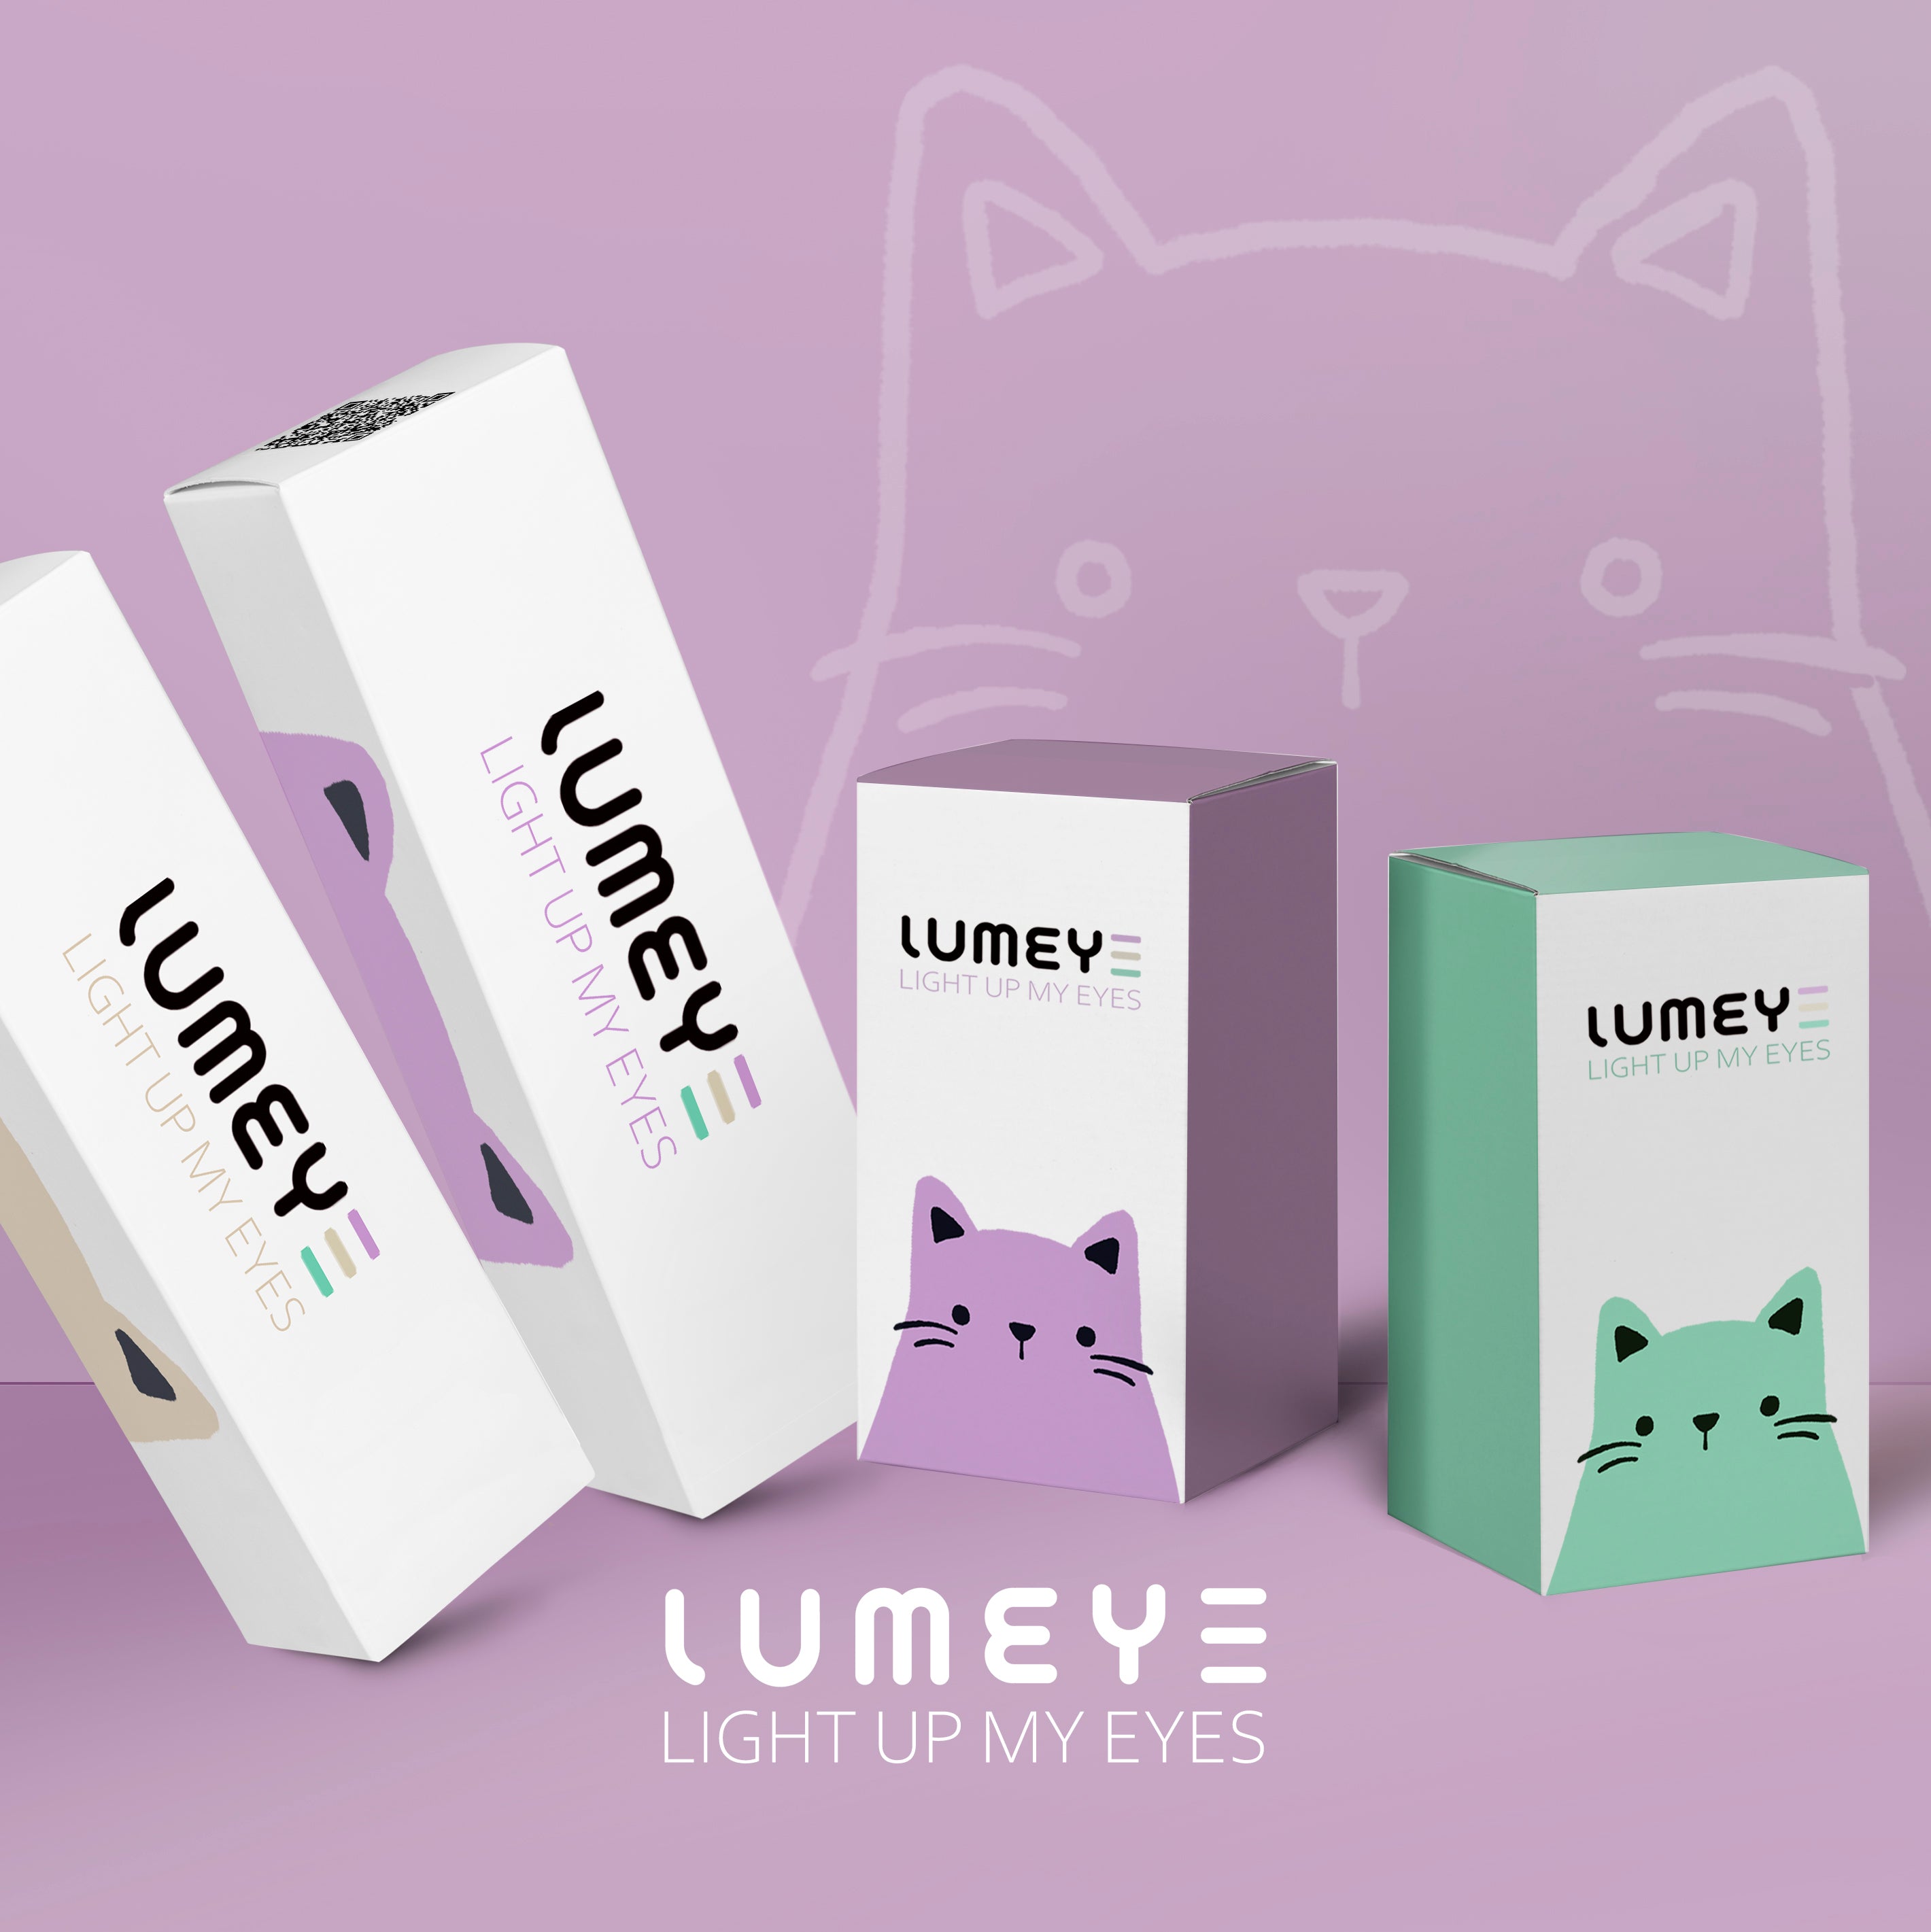 Best COLORED CONTACTS - LUMEYE Dawn Blue Colored Contact Lenses - LUMEYE